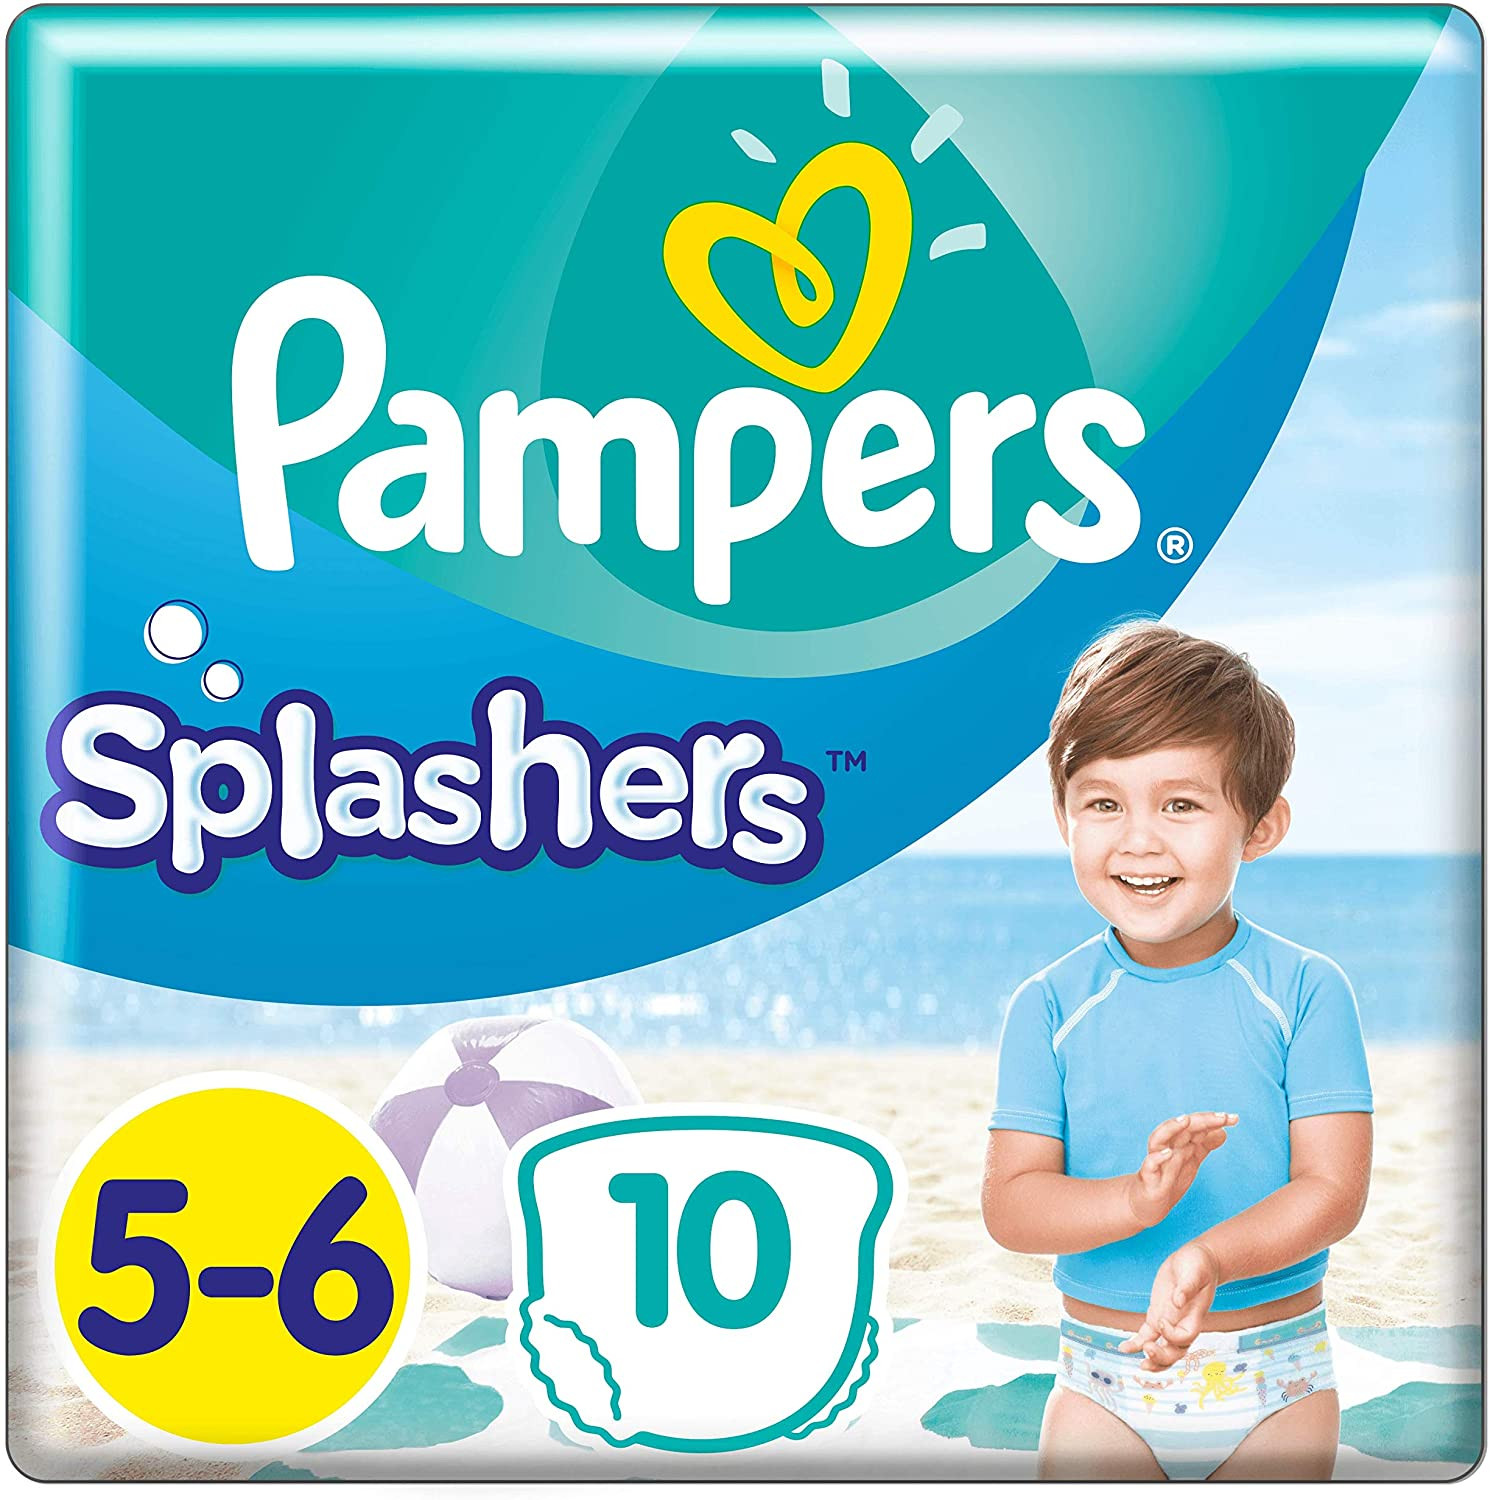 Pampers Splashers Pañales Desechables 5-6 (14kg+) agua, 10